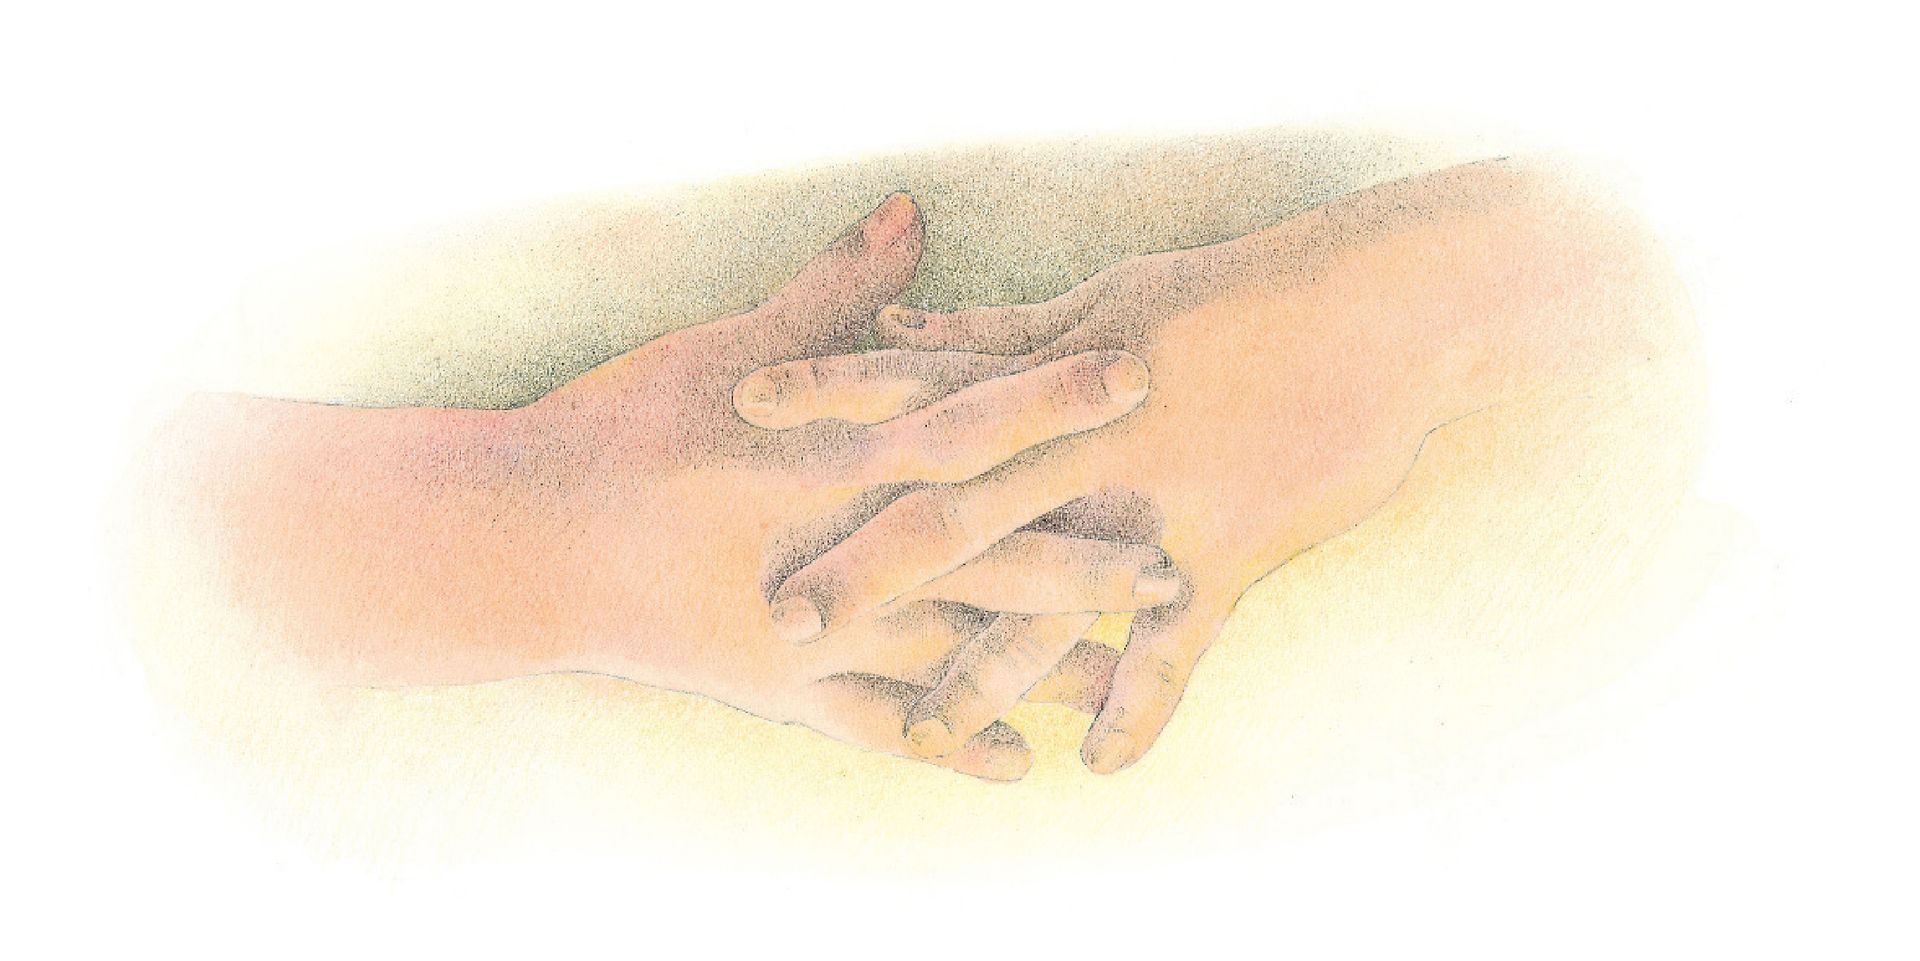 Two hands folded reverently. From the Children’s Songbook, page 272, “I Have Two Little Hands”; watercolor illustration by Richard Hull.